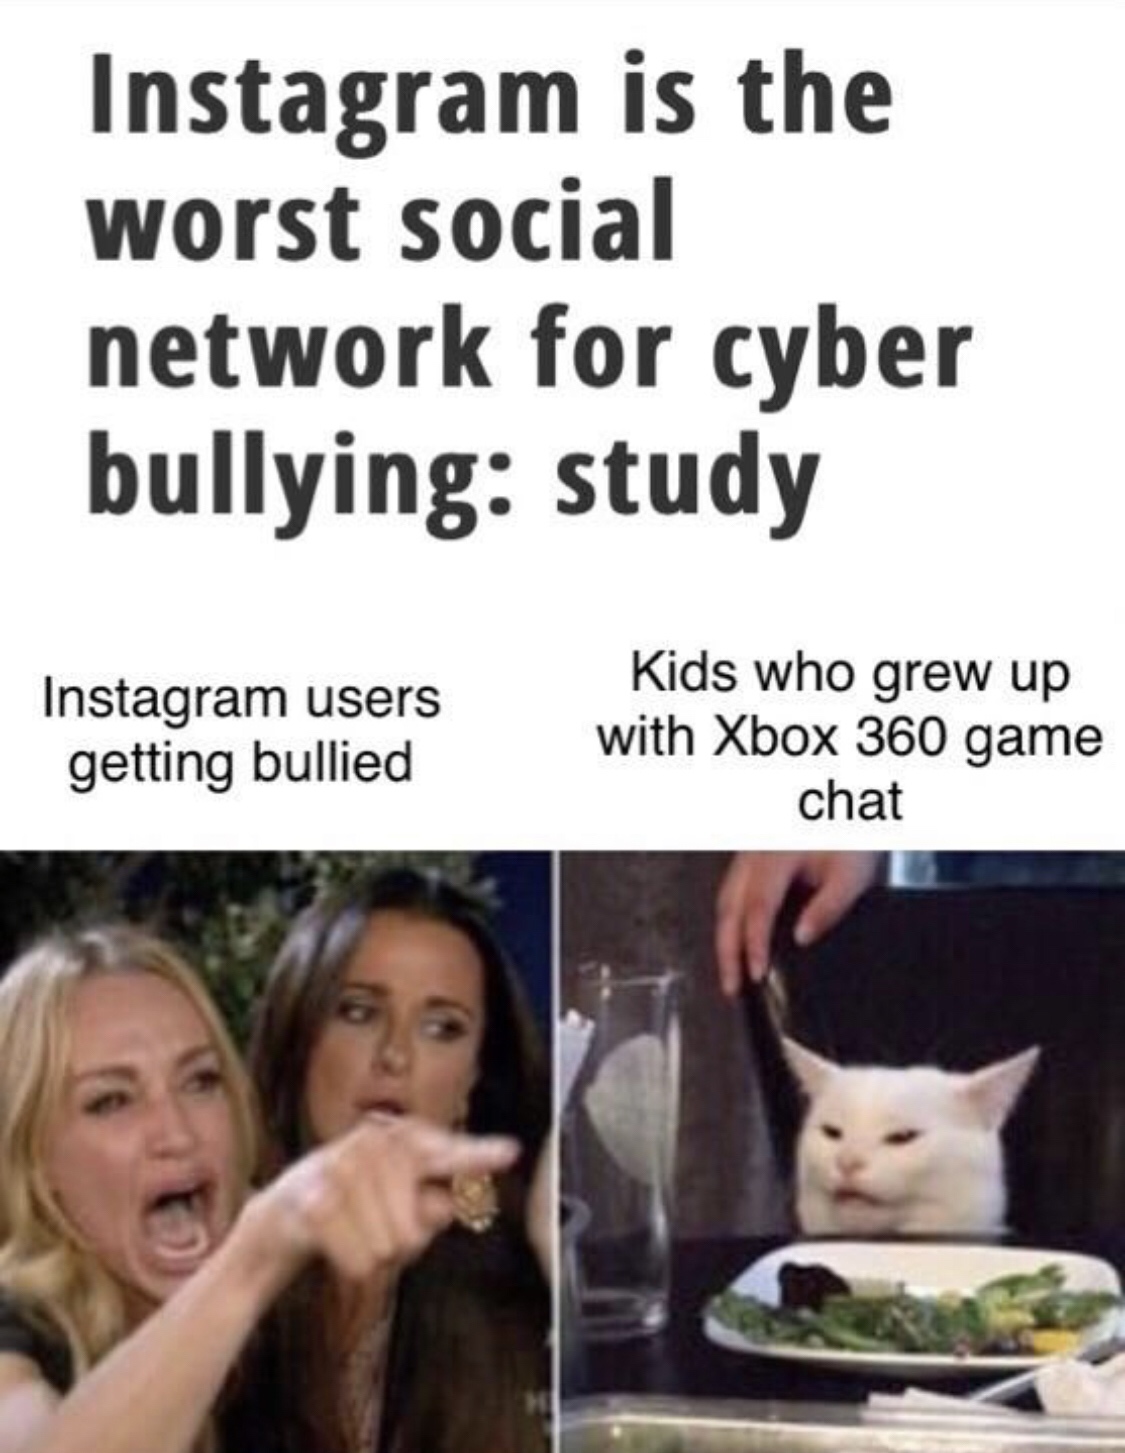 Meme - Instagram is the worst social network for cyber bullying study Instagram users getting bullied Kids who grew up with Xbox 360 game chat